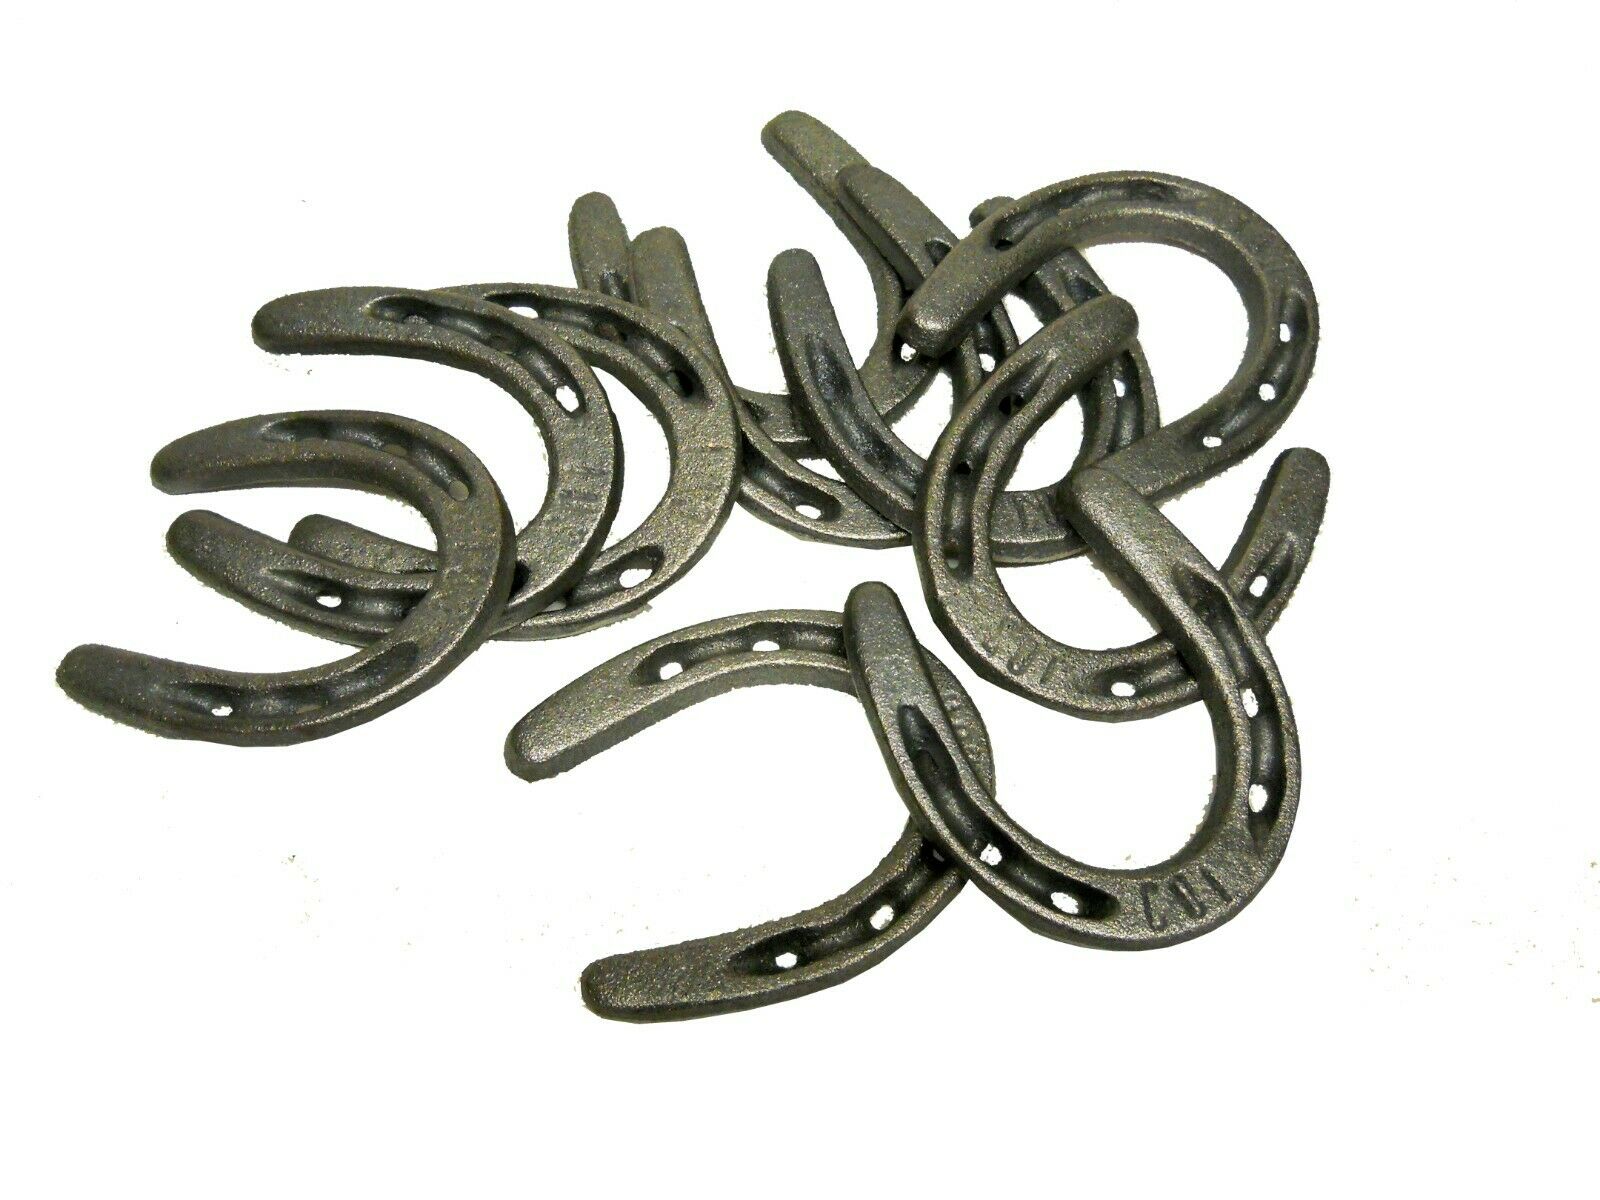 20 Pc Cast Iron Horseshoes For Decorating And Crafts Weddings 3 1/2 X 3 Favors